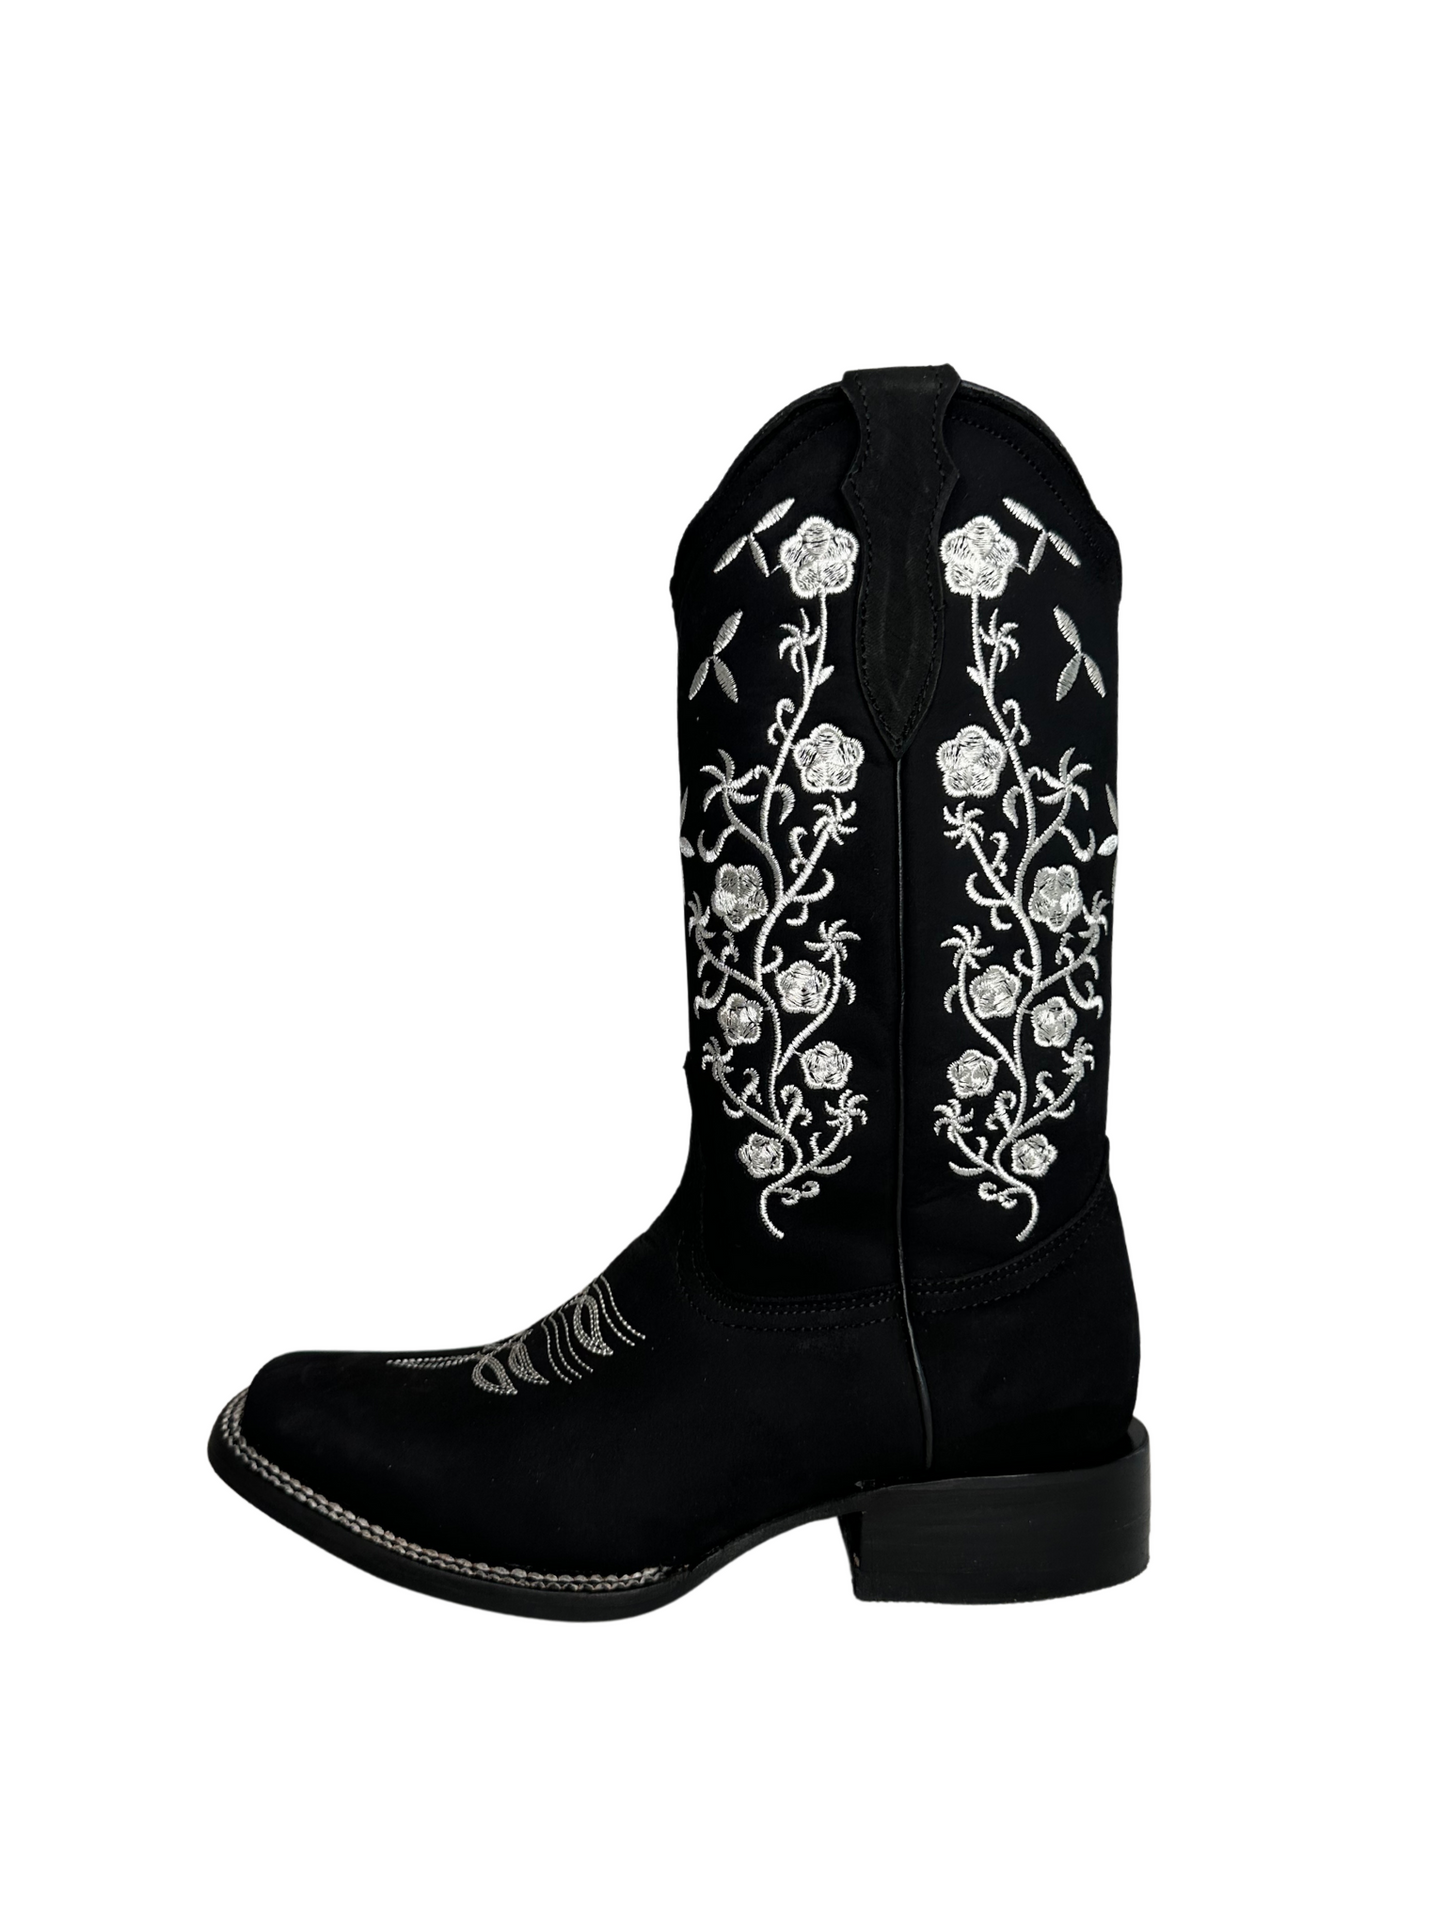 La Sierra Black Floral Embroided Square Toe Boot